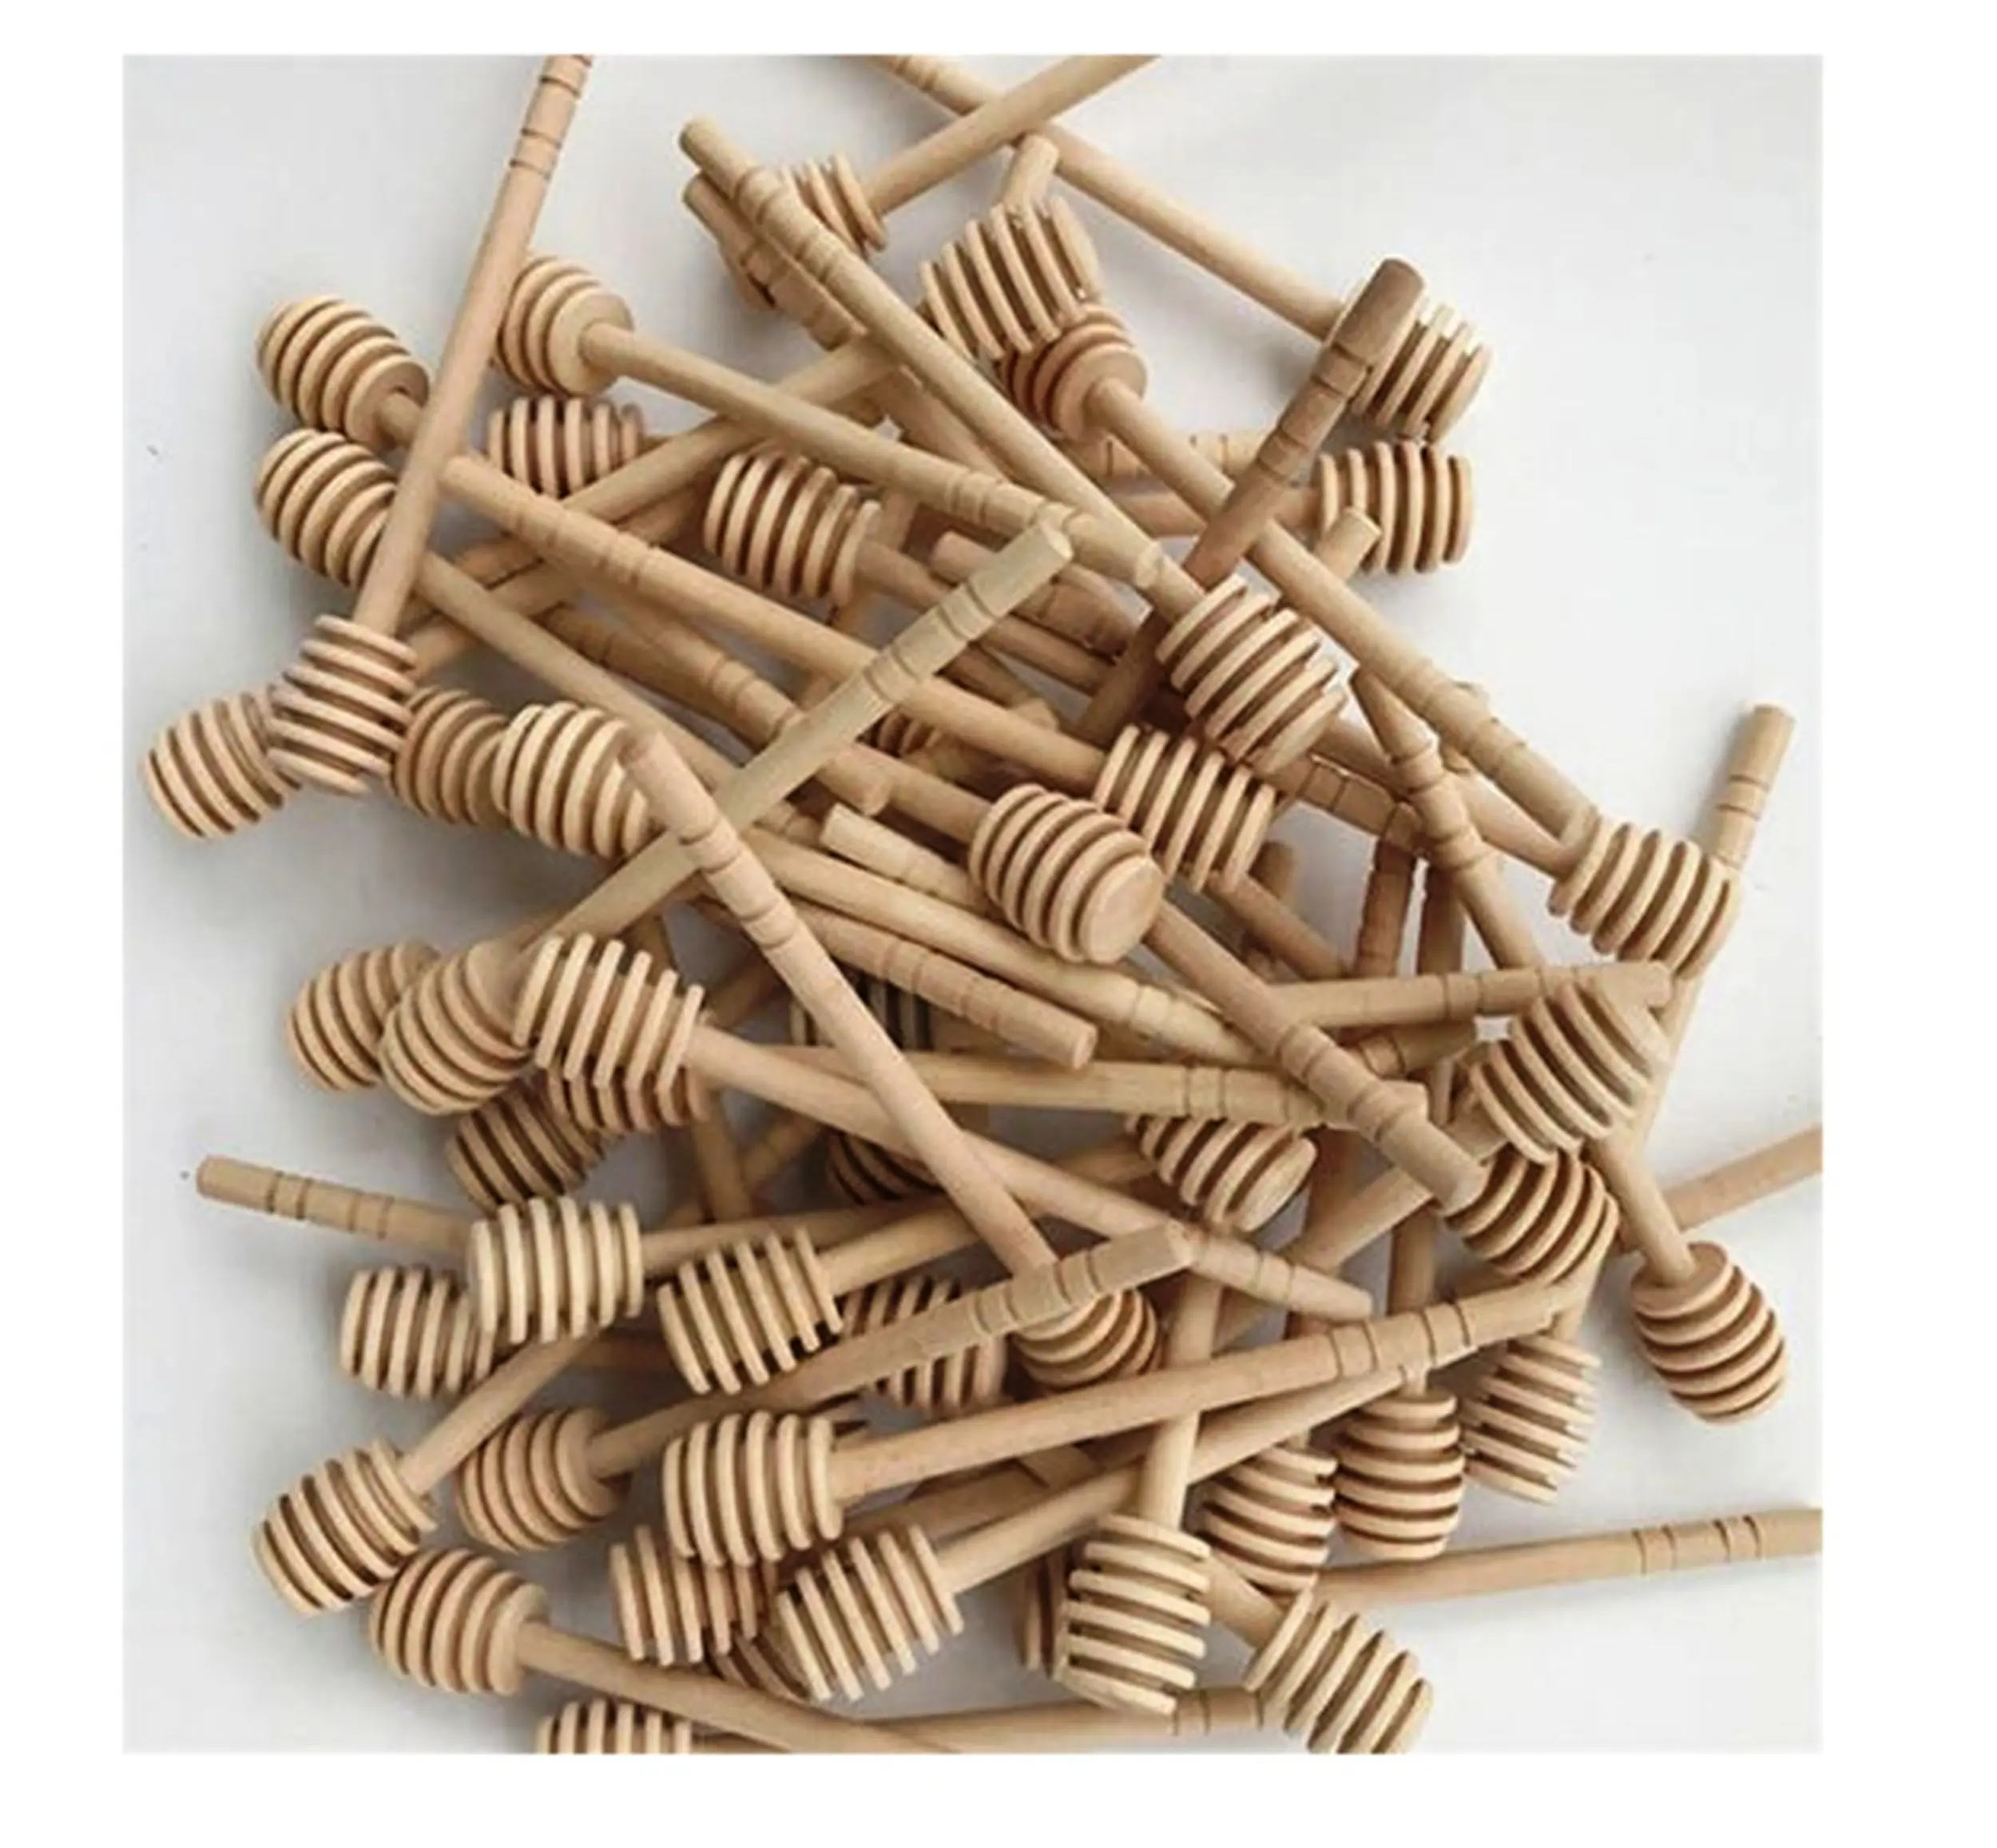 413 Organic Custom Wooden Honey Stick Dipper Custom engraved & Size wedding party favors gifts Natural Color Made In India